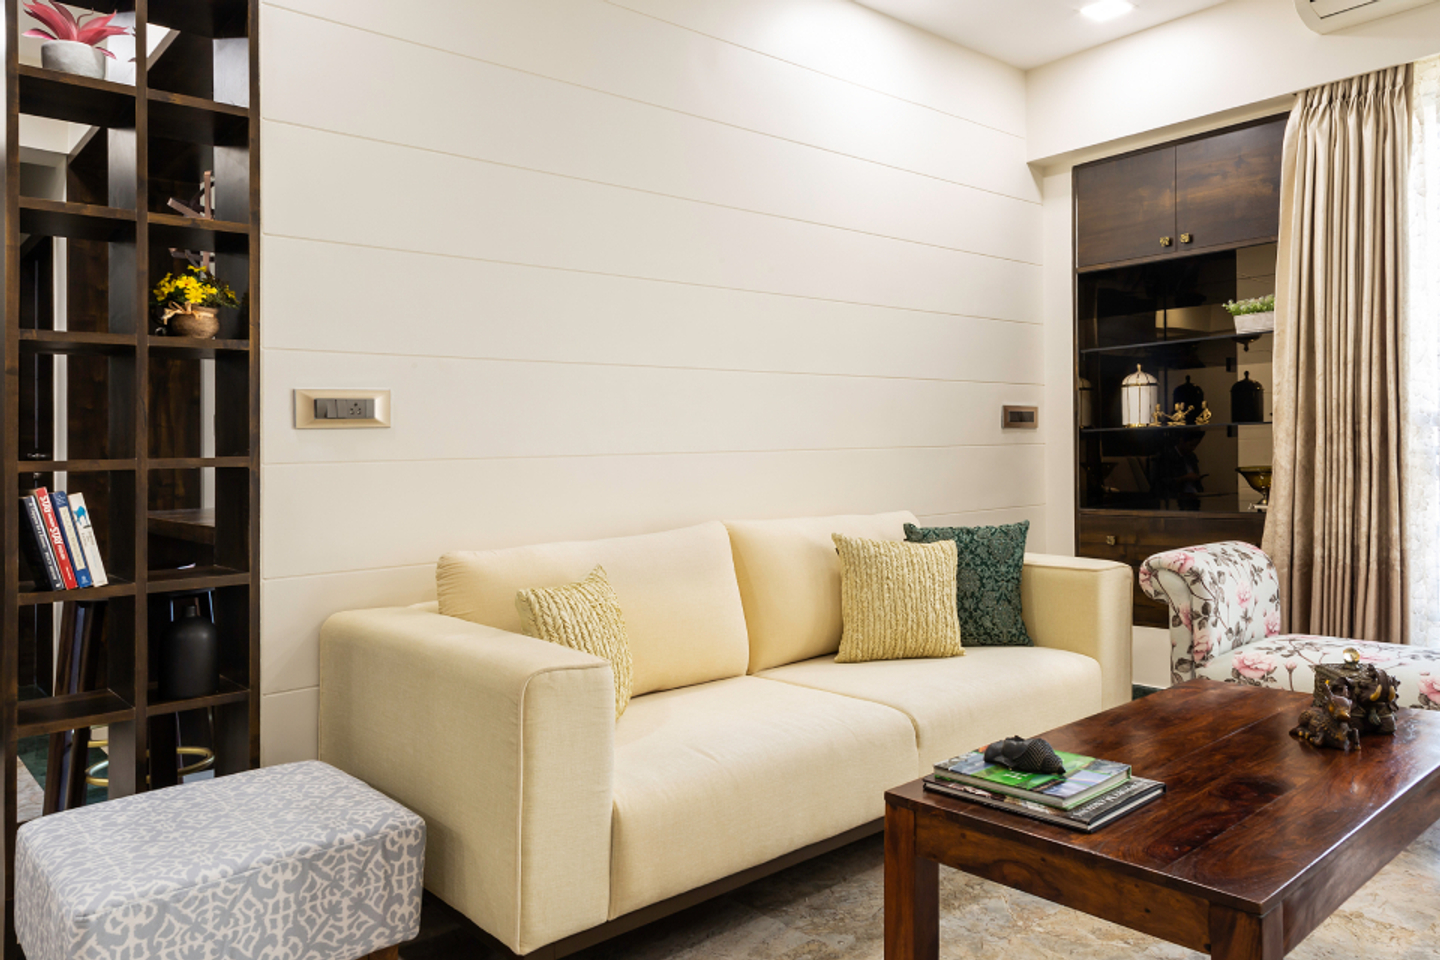 Contemporary Living Room Design With Wall Paneling And Grooves